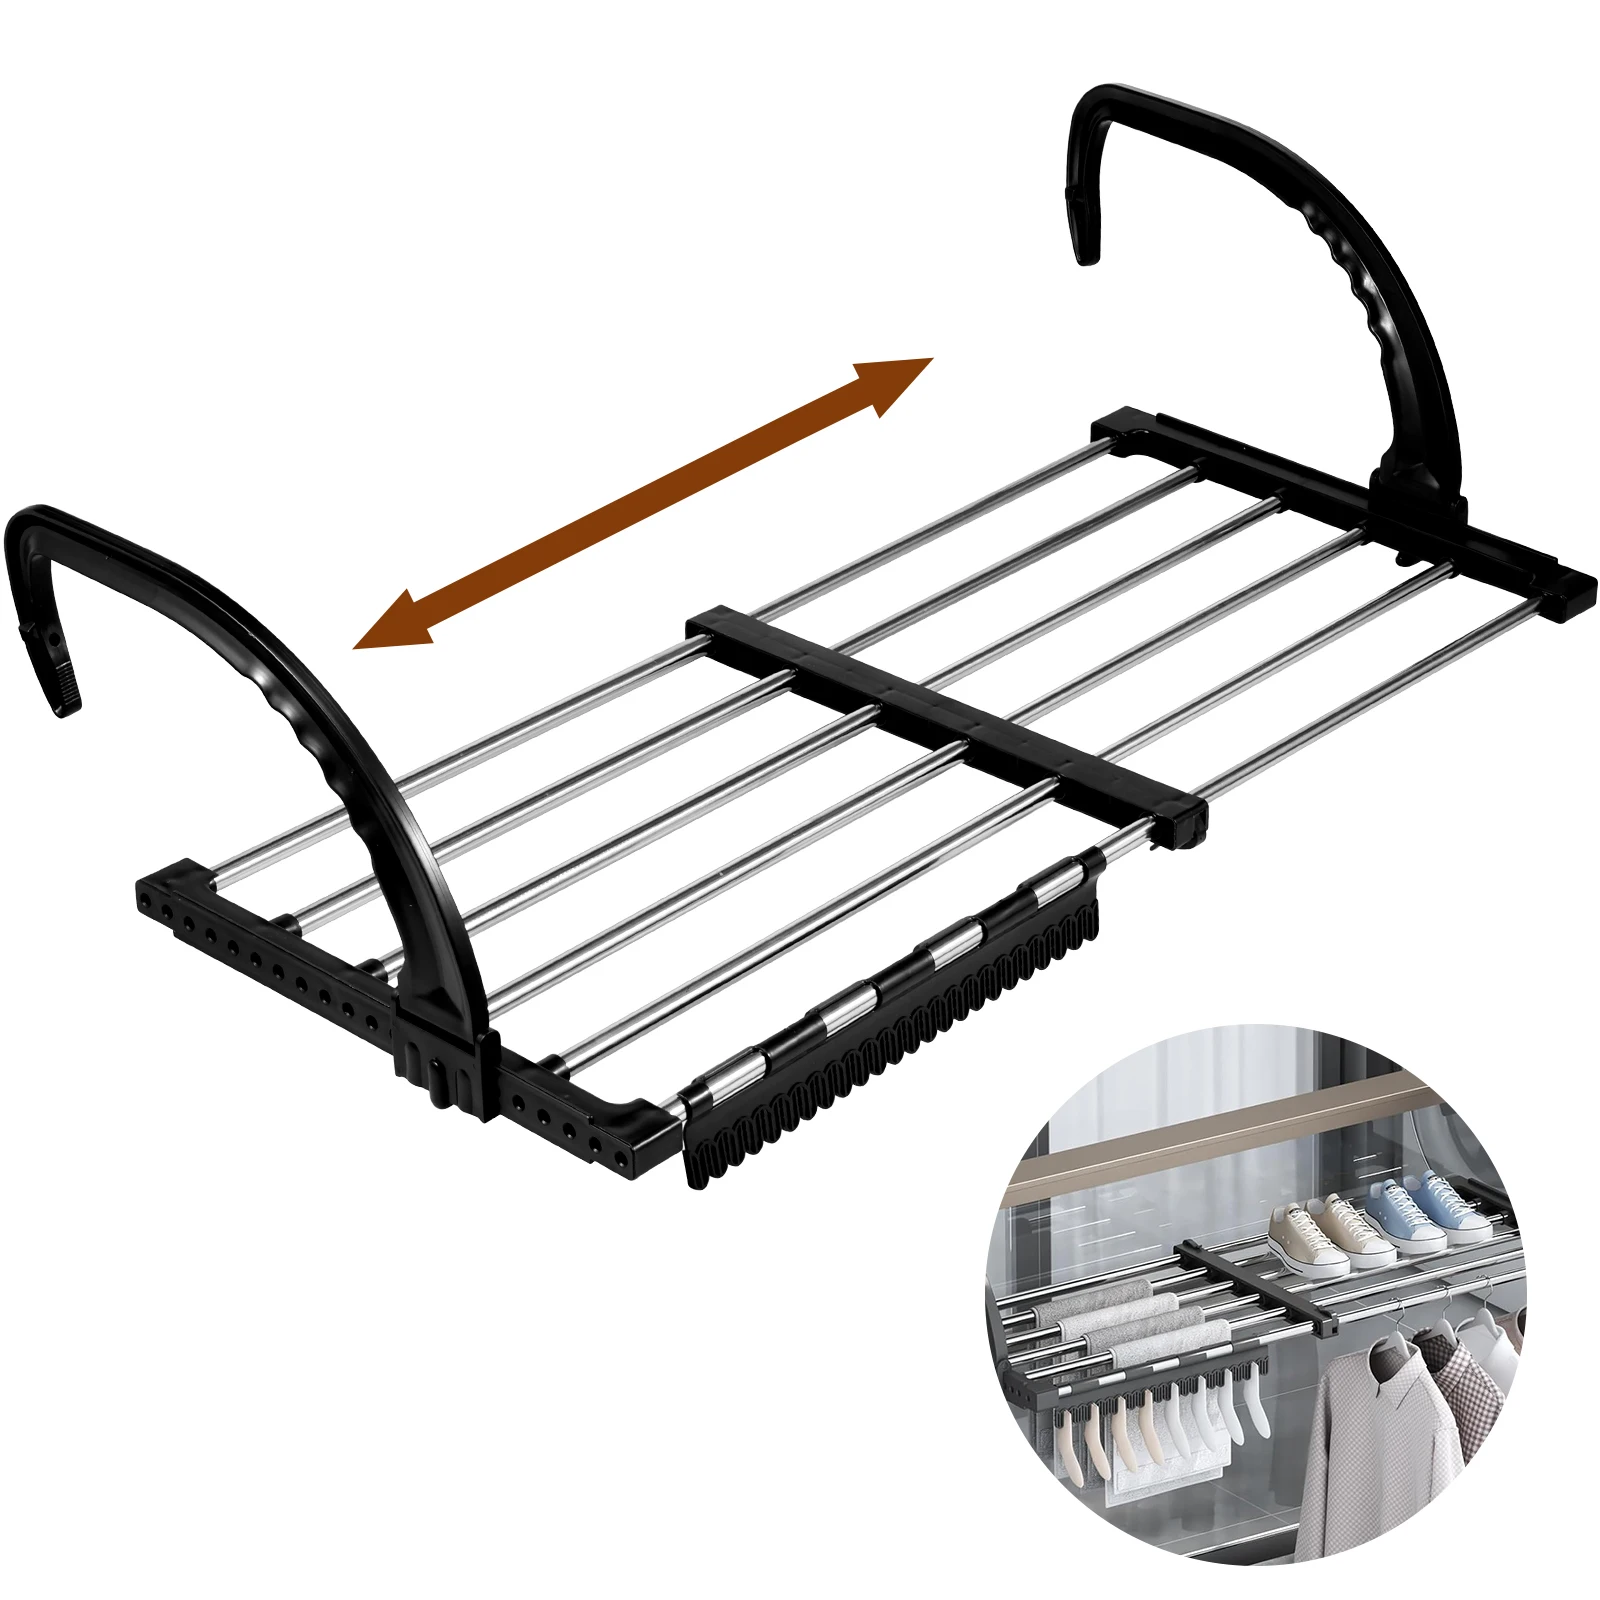 

Radiator Clothes Airer Foldable Radiator Drying Rack 42-72CM Extendable Radiator Clothes Drying Rack Balcony Stainless Steel